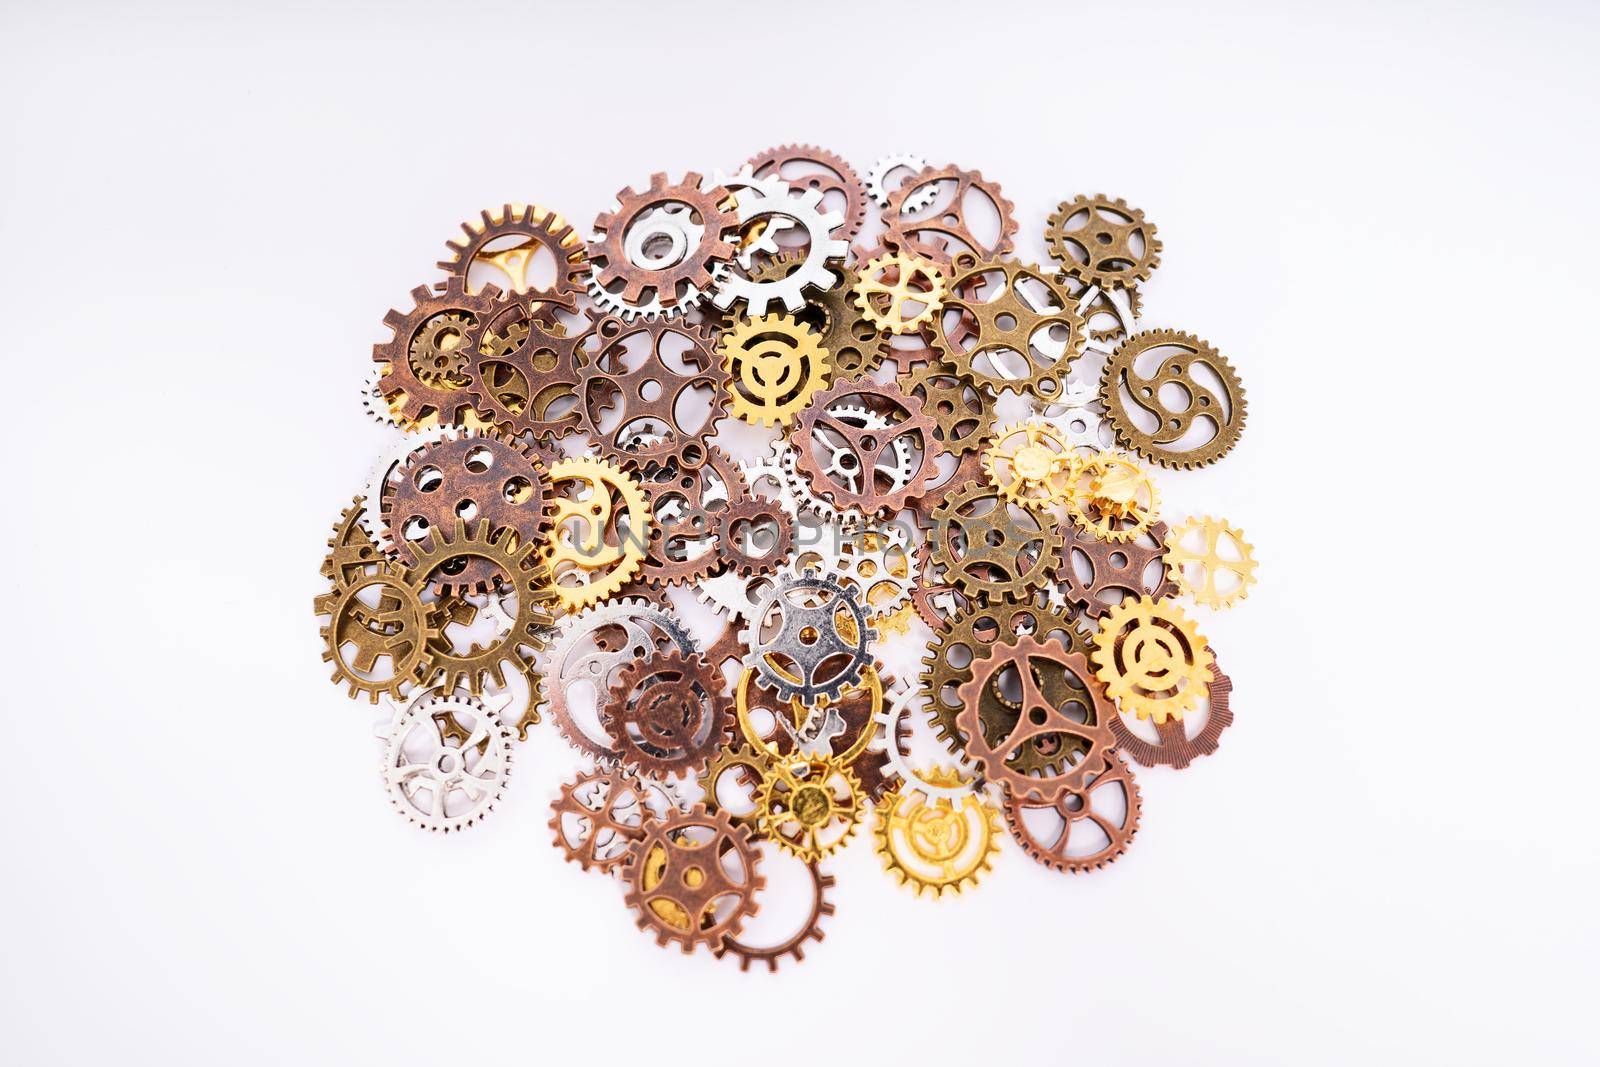 Pile of gear wheels and cogs in different colors by Mendelex